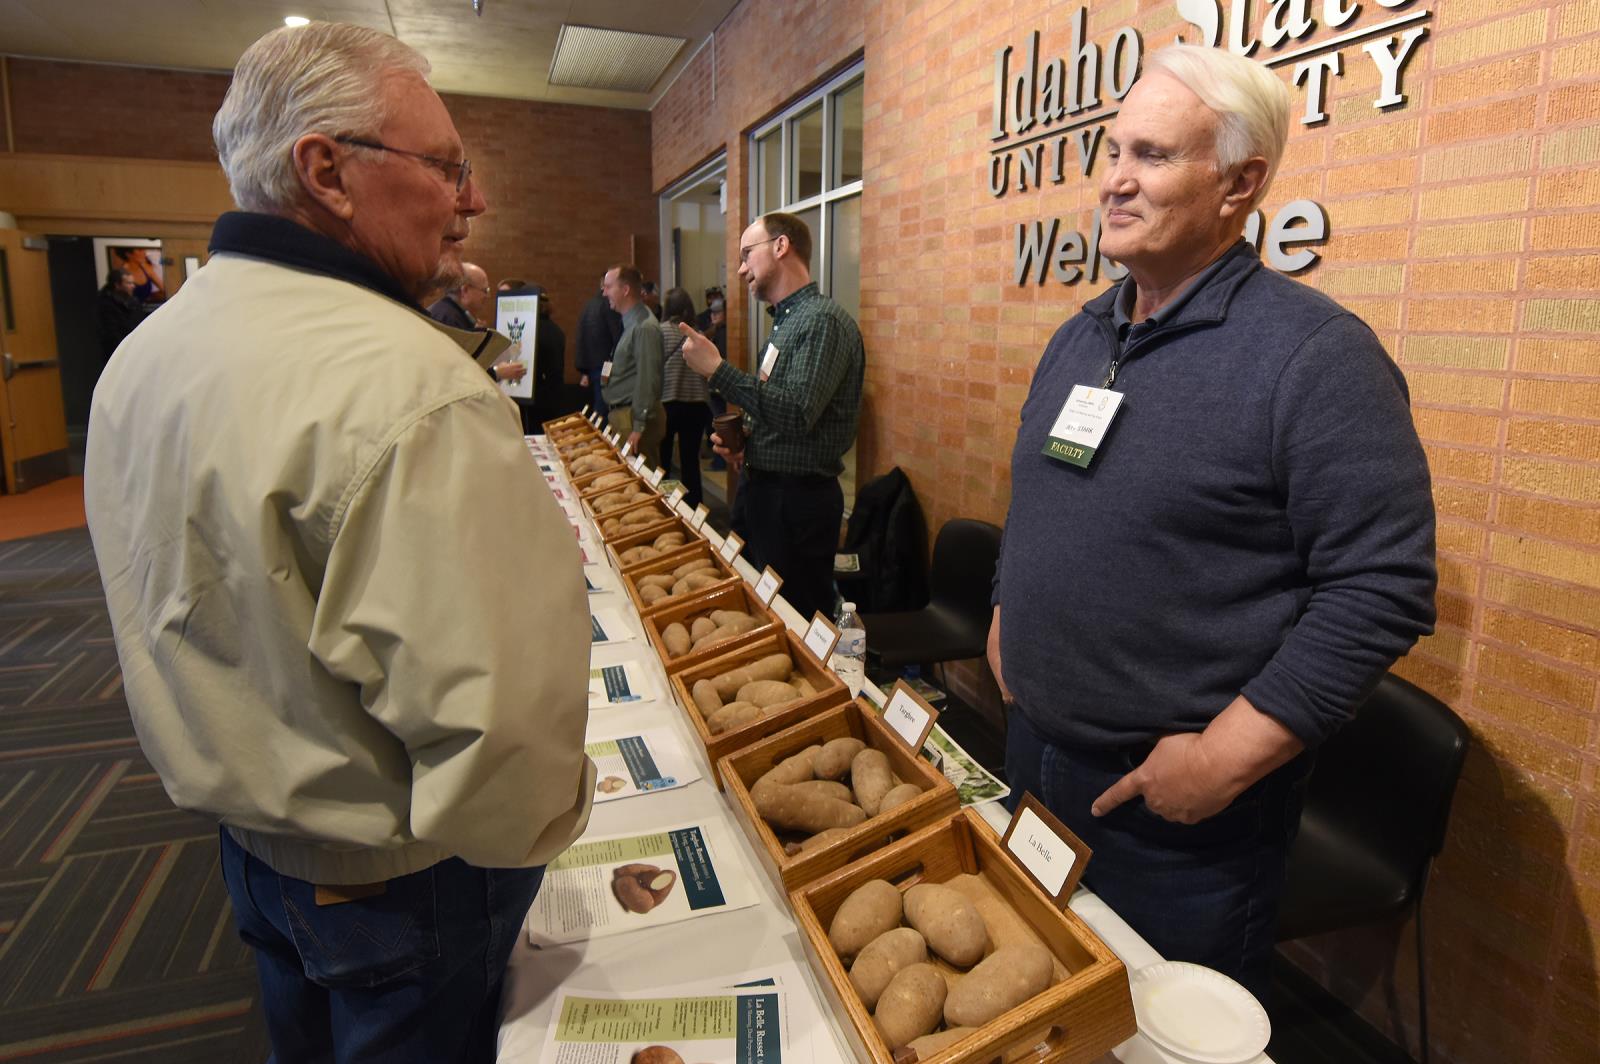 Jeff Stark, right, speaks with Randy Thomas of Blackfoot during the 2020 Idaho Potato Conference in Pocatello in January. Stark, who retired in January, oversaw the release of more than 20 new potato varieties during his time as director of the University of Idaho’s Potato Variety Development Program.